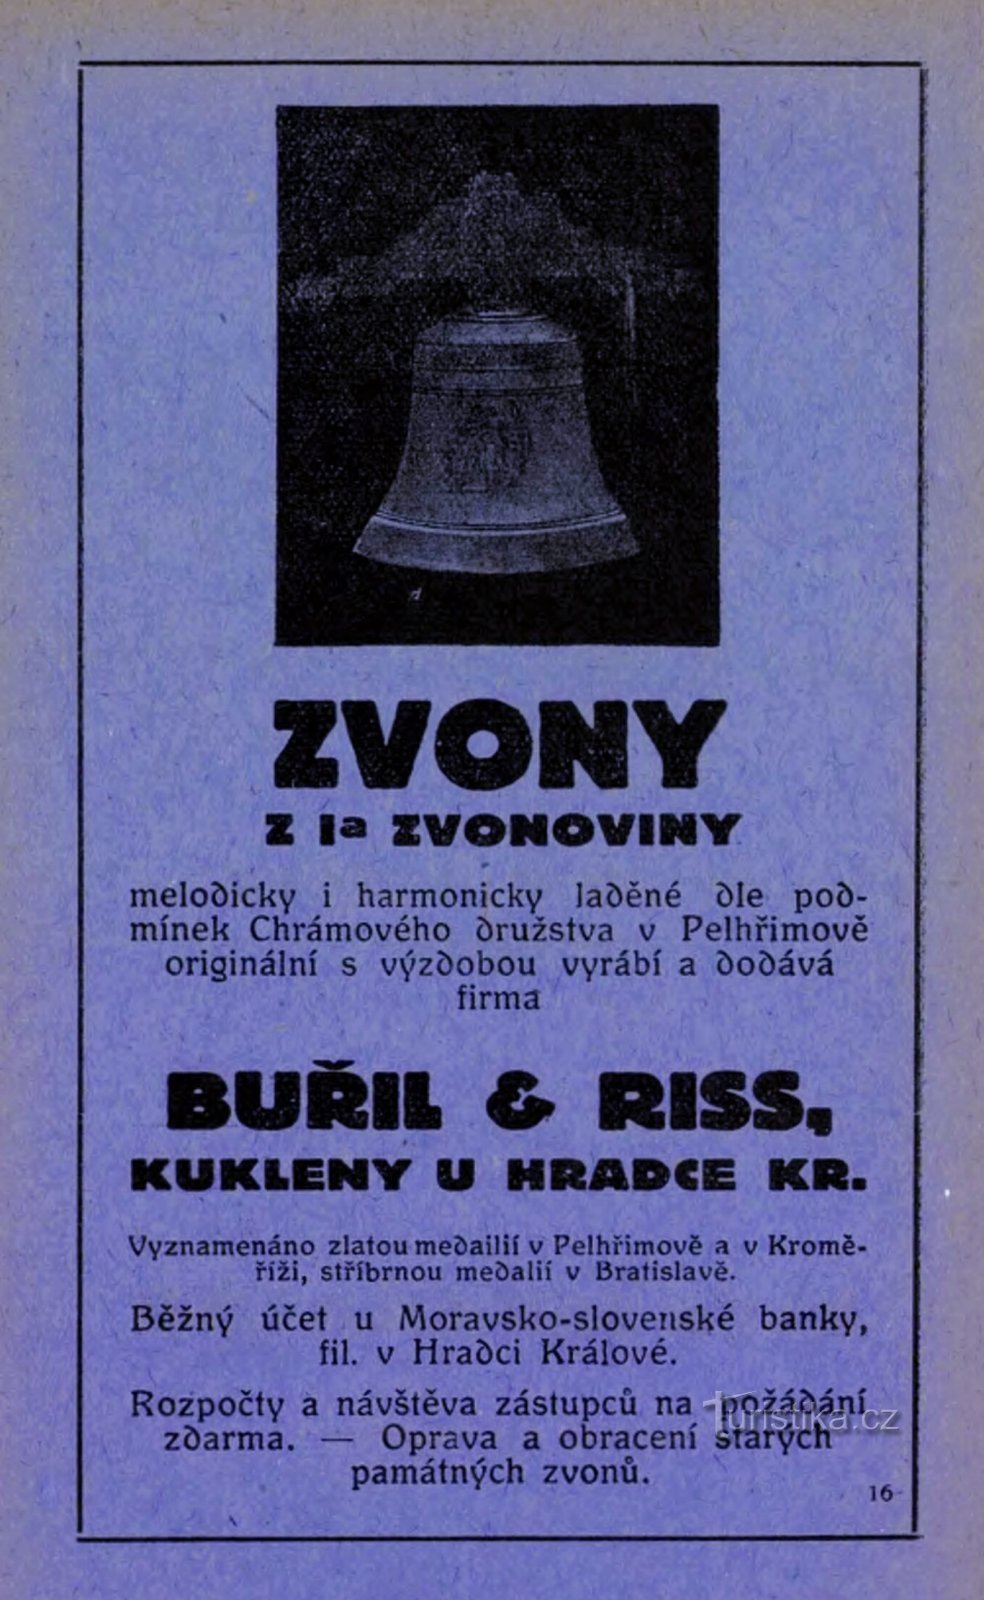 Period advertisement of the Buřil and Riss bell-making workshop in Kuken from 1928